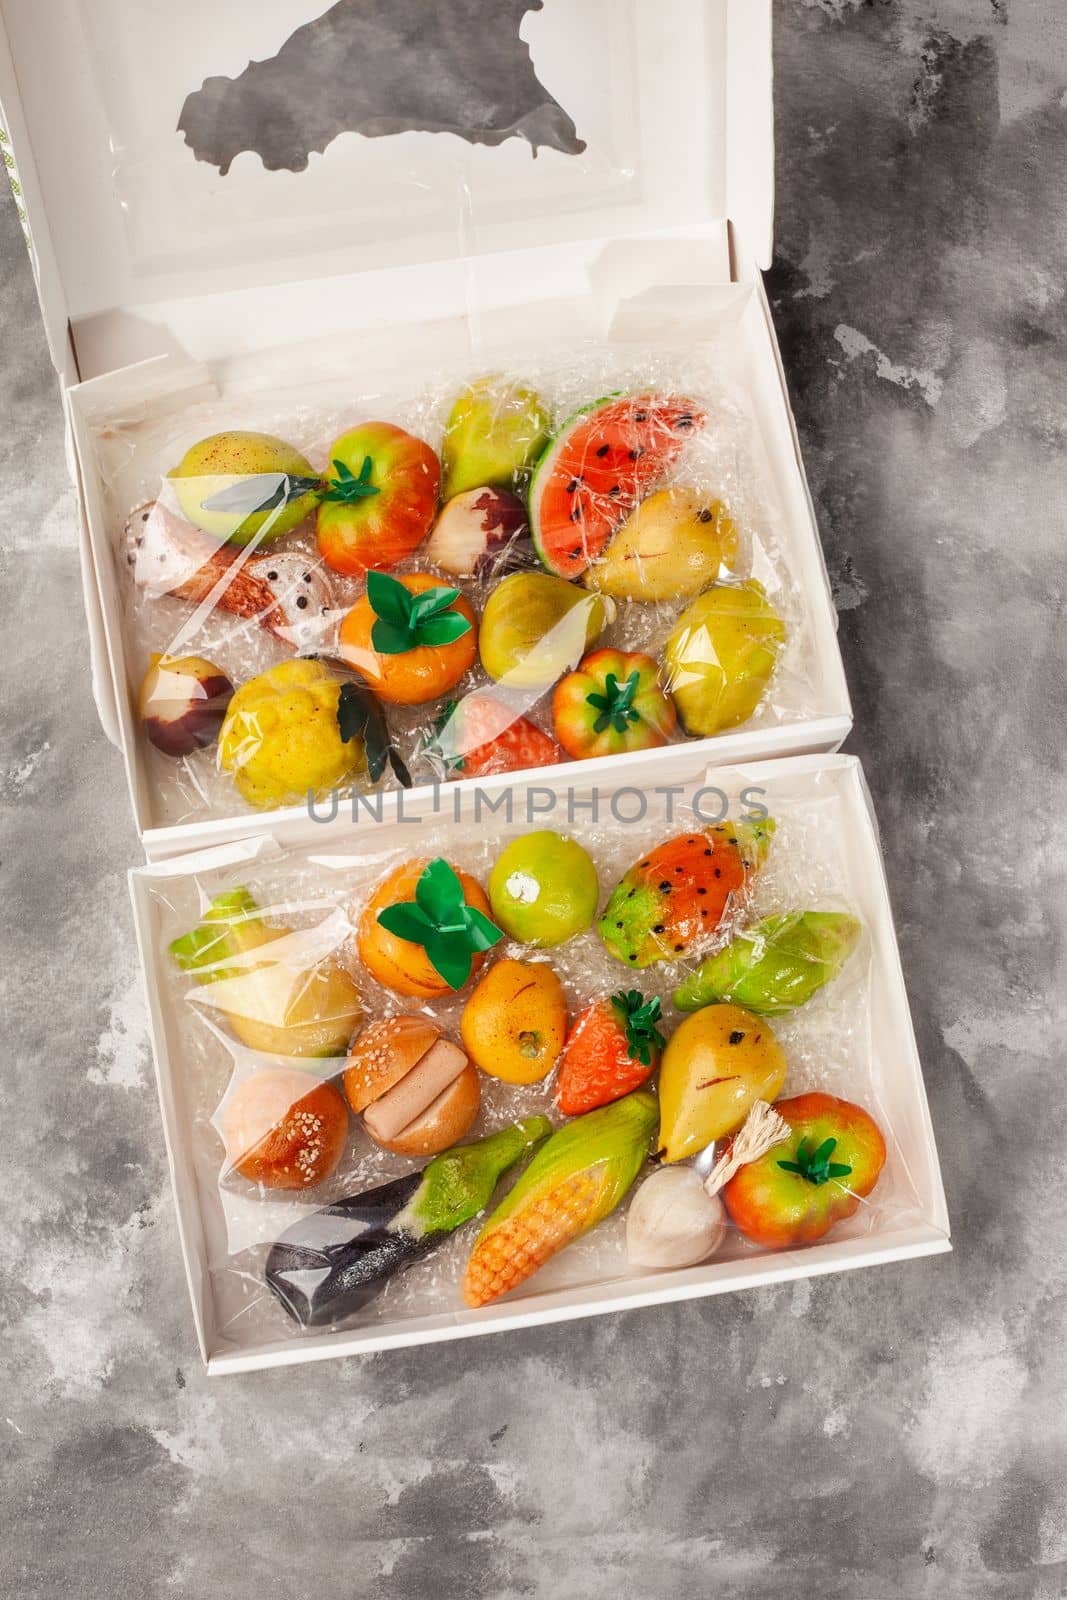 Various of colorful marzipan sweets in form of fruits and vegetables in open carton boxes on gray surface. Popular Italian treats traditionally made of almond paste. Craftsmanship in confectionery art